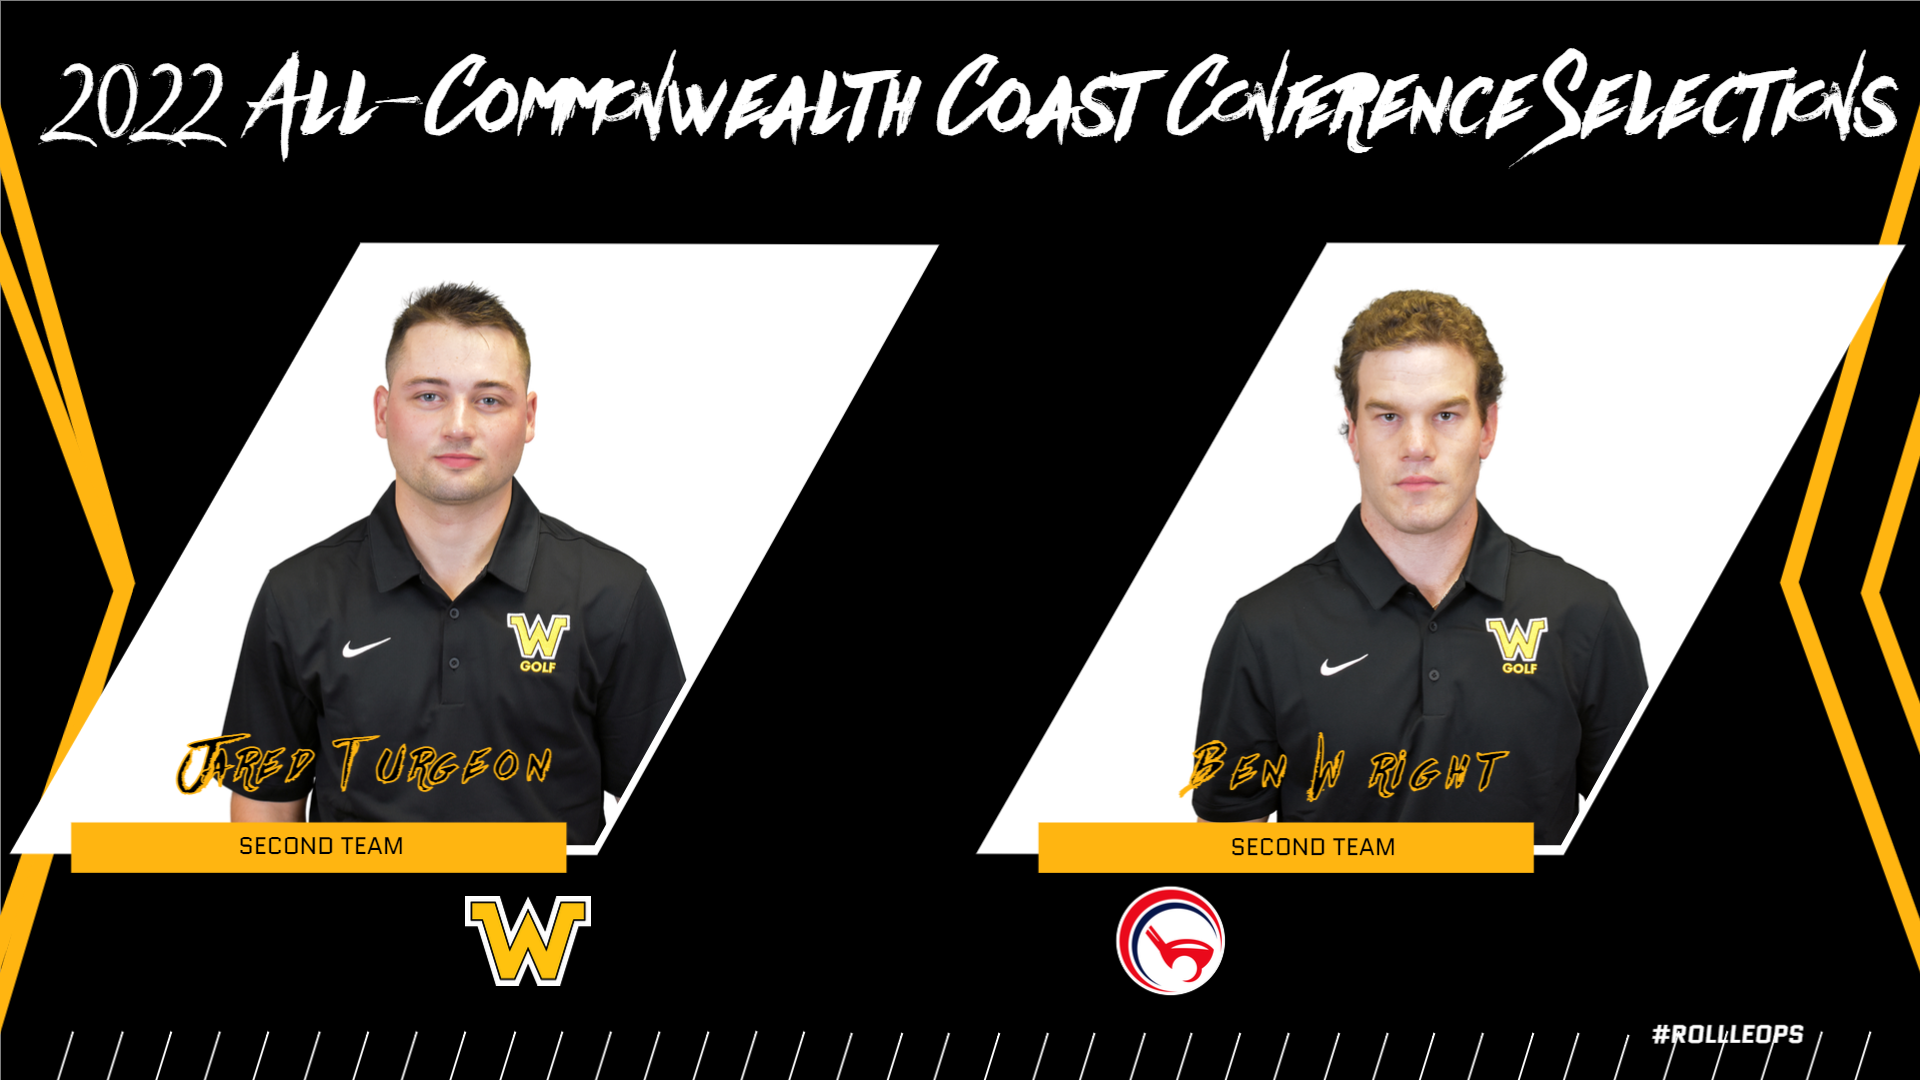 Turgeon, Wright Earn All-CCC Honors